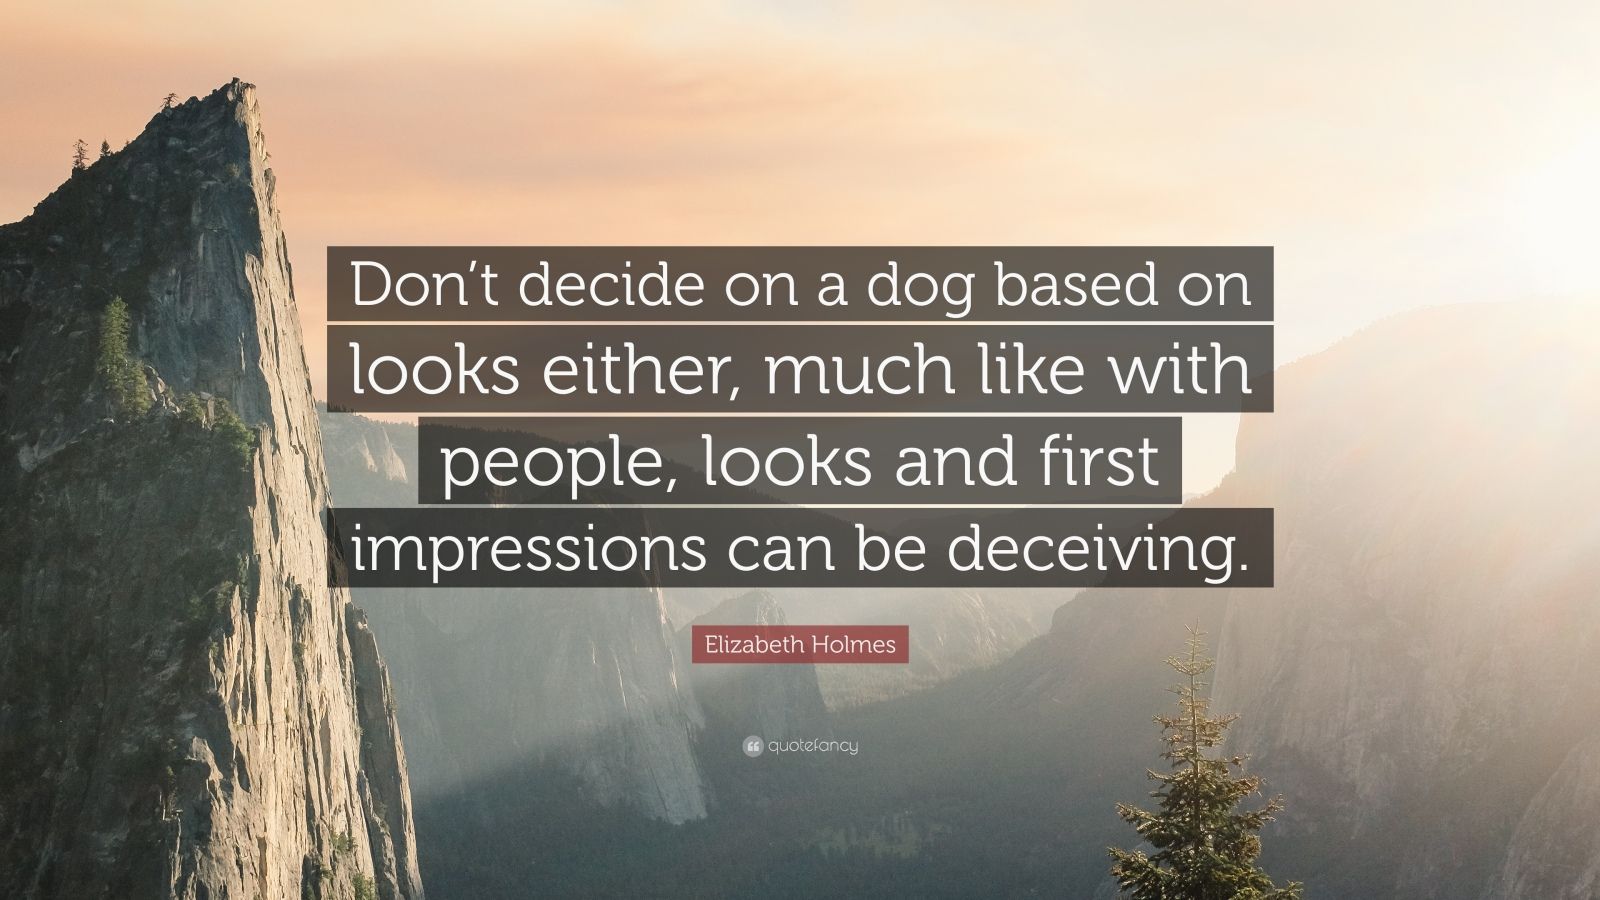 Elizabeth Holmes Quote: “Don’t decide on a dog based on looks either